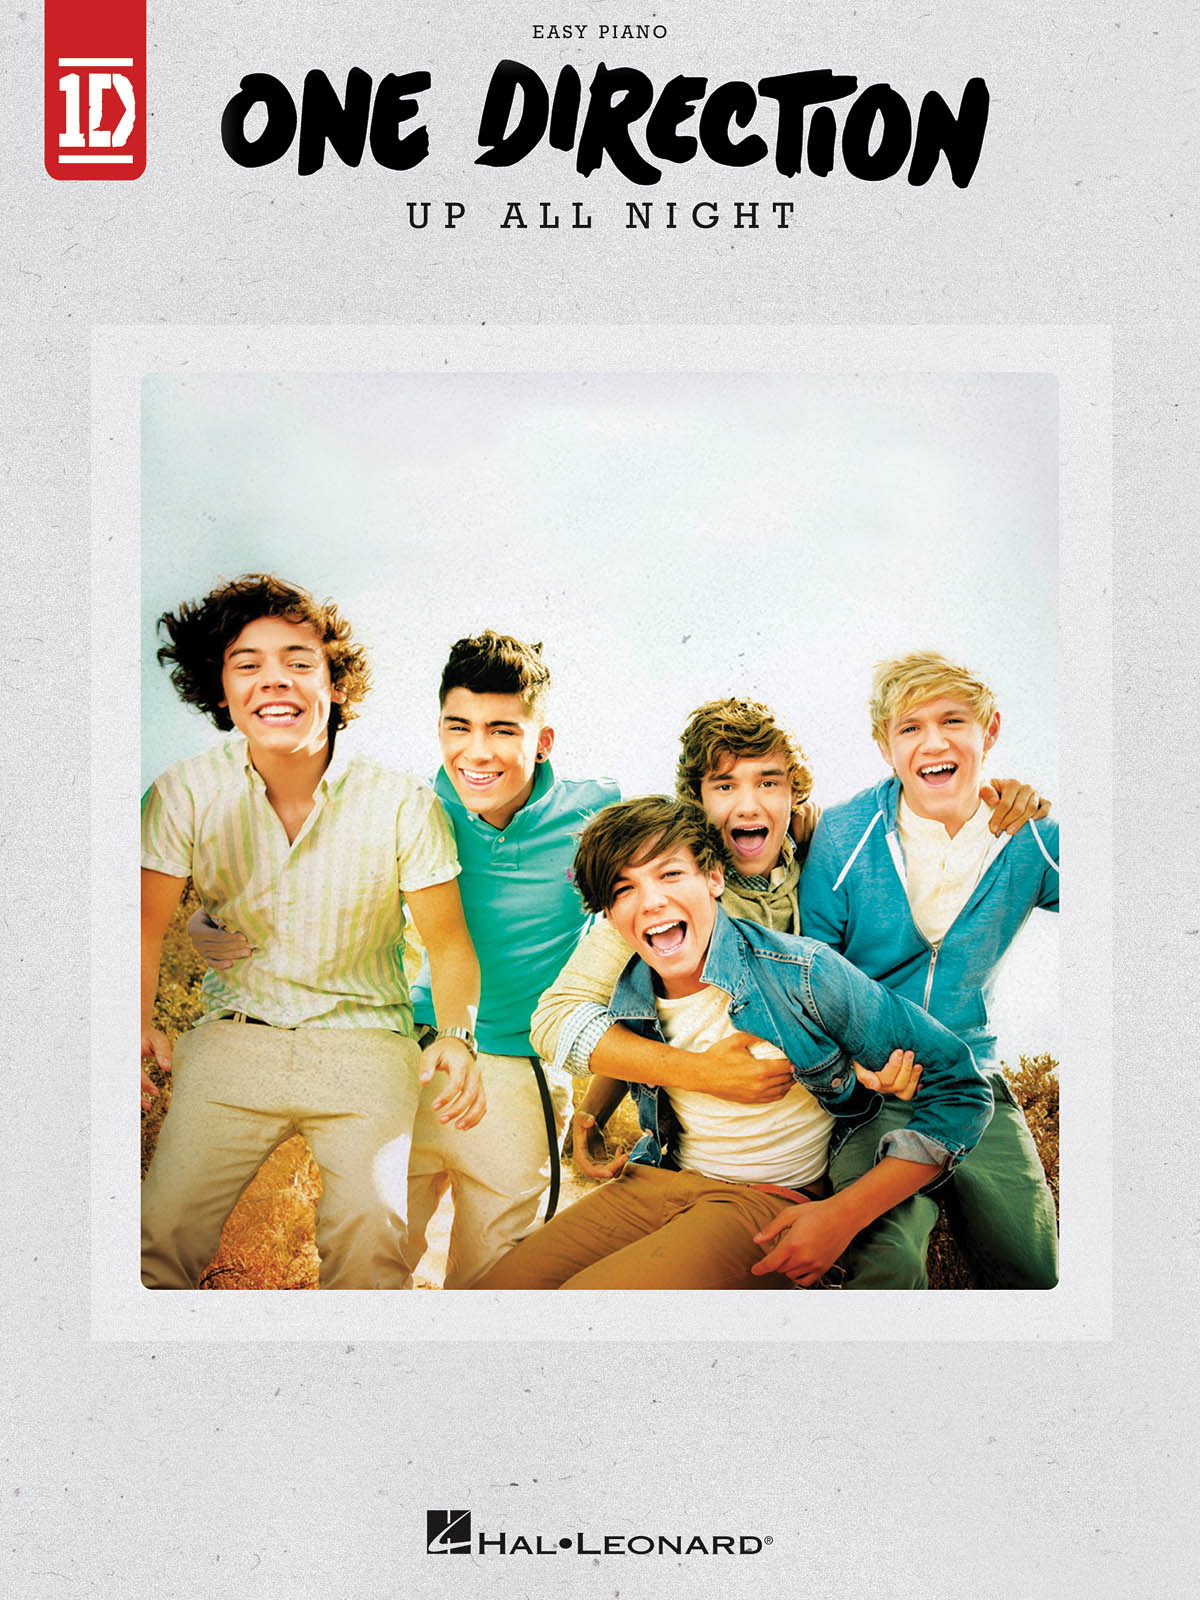 One Direction: One Direction - Up All Night: Easy Piano: Album Songbook